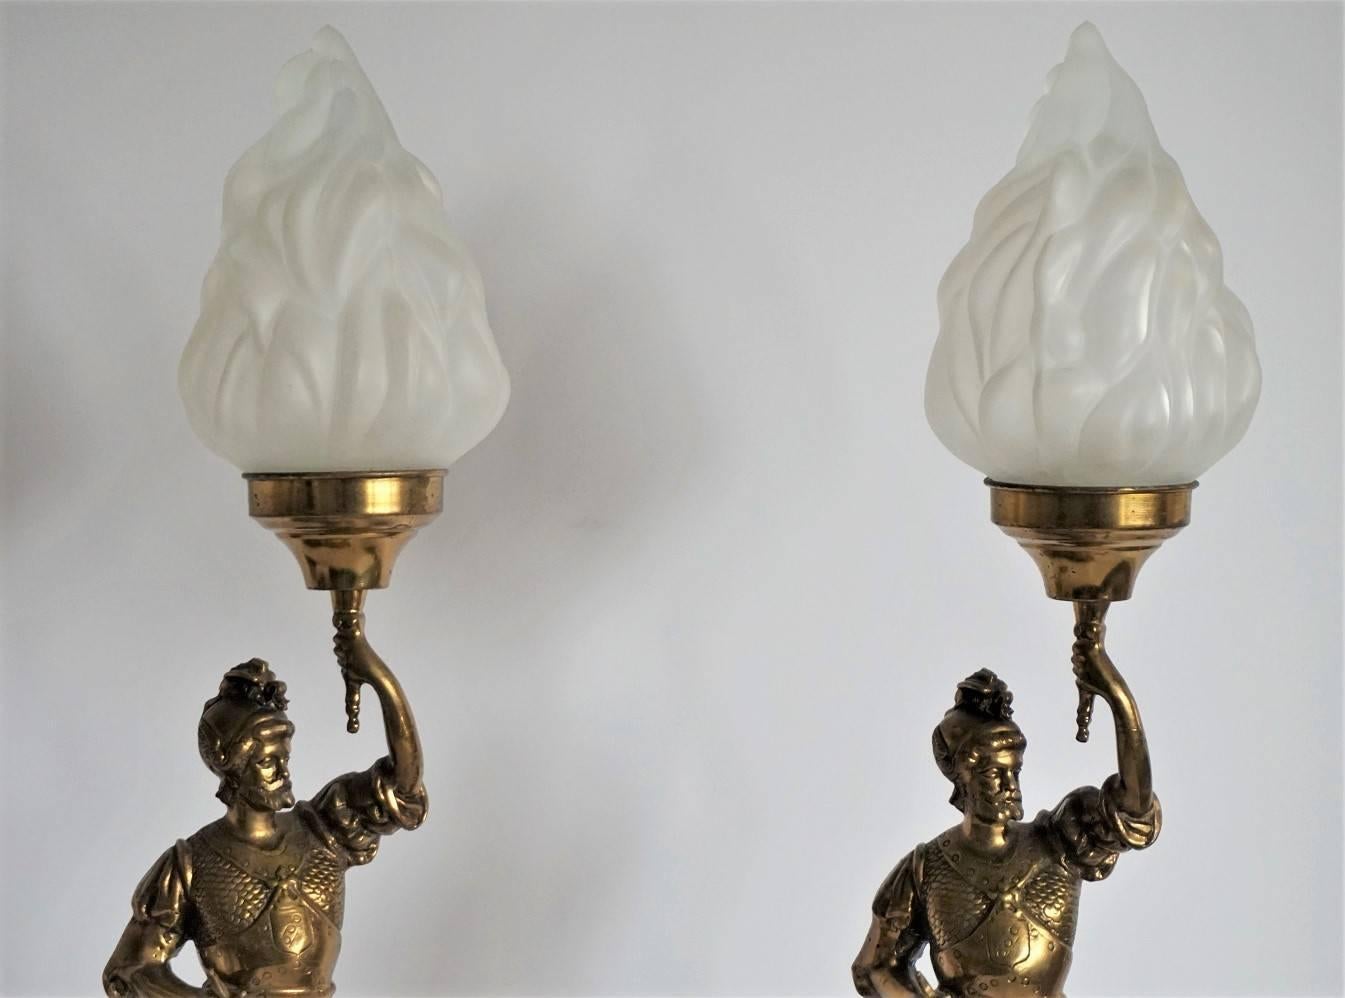 Cast Pair of Late 19th Century Bronze Soldiers Electrified Candelabras, Table Lamps